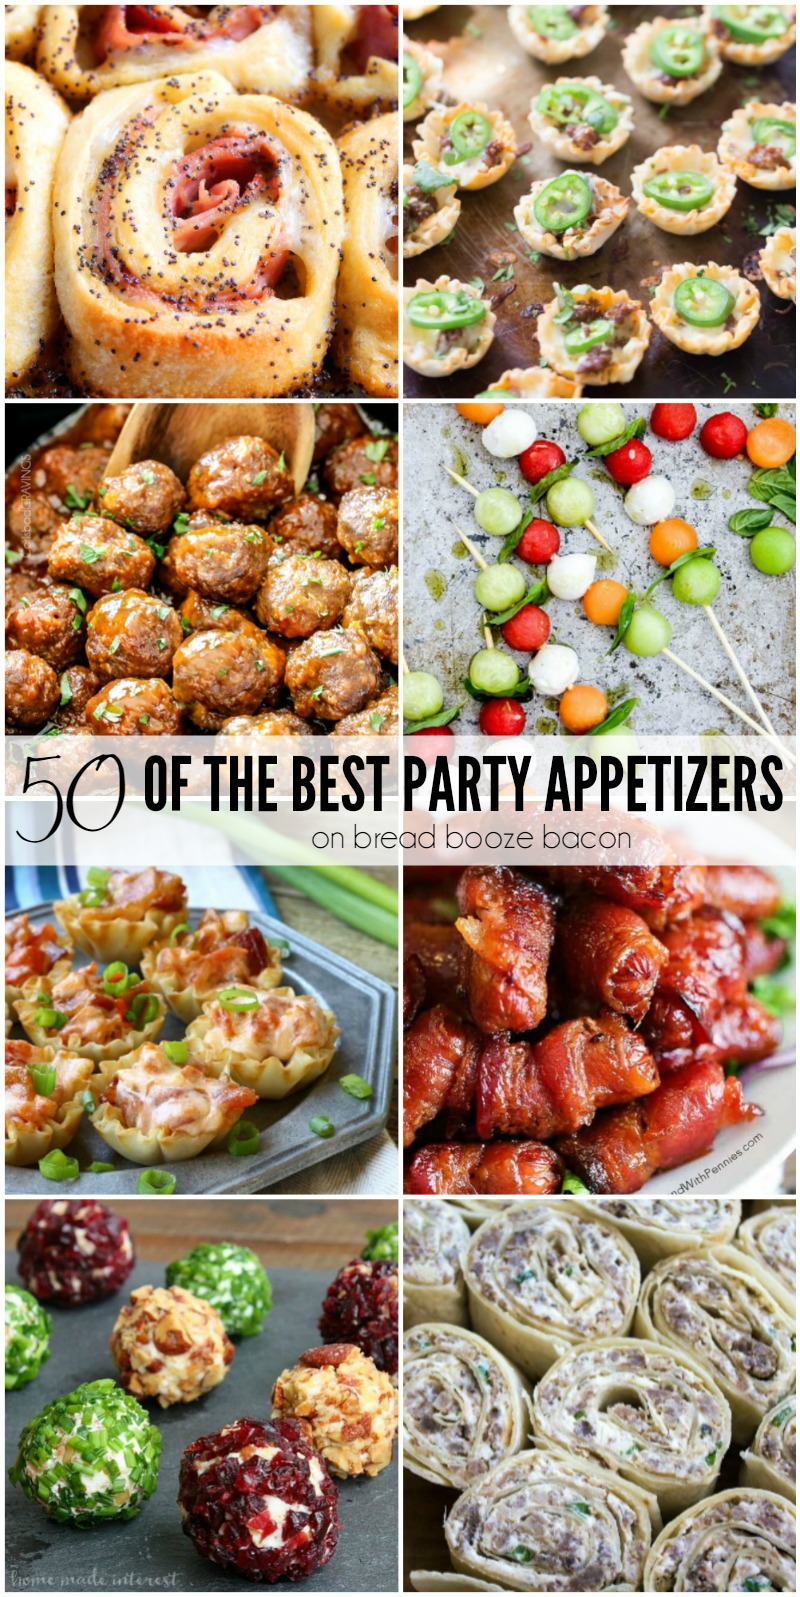 50 of the best party appetizers • bread booze bacon